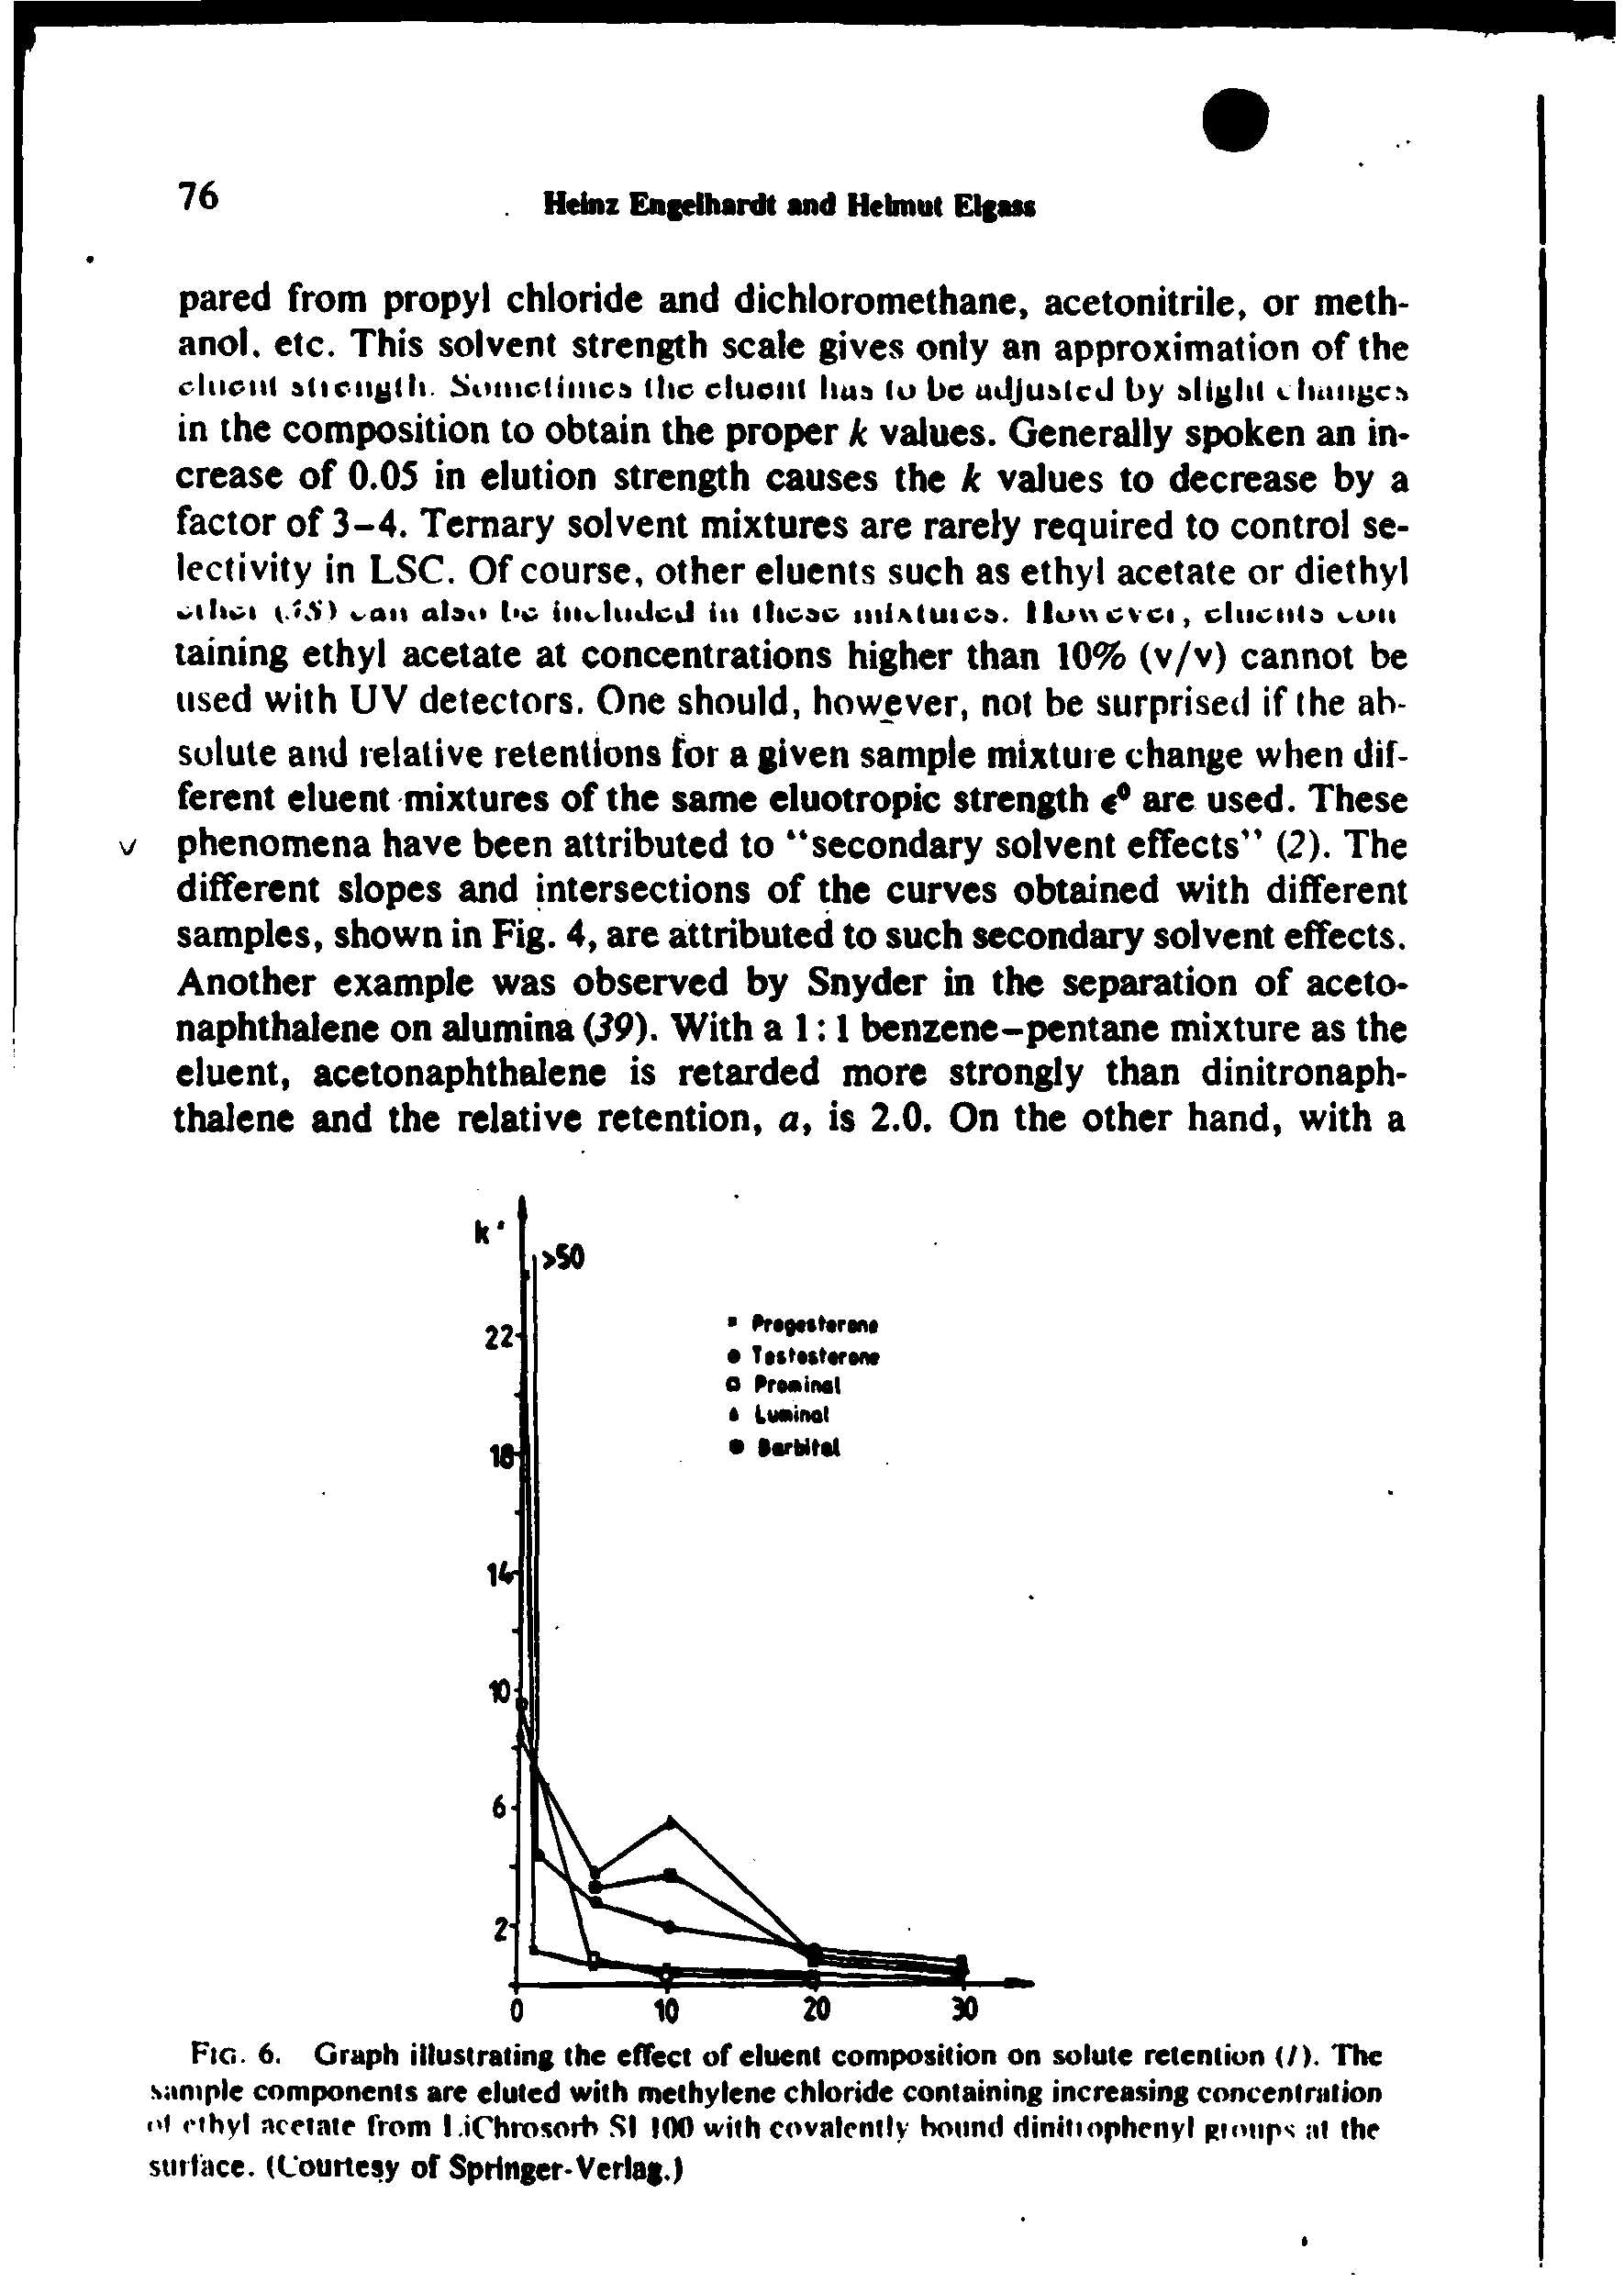 Fig. 6. Graph illusirating the effect of eluent composition on solute retention </). The sample components are eluted with methylene chloride containing increasing concentration i>( cihyl acetate from l.iChrosorh SI 100 with covalently botinti dinitinphenyl giniips at the stitface. (Courtesy of Springer-Verla. )...